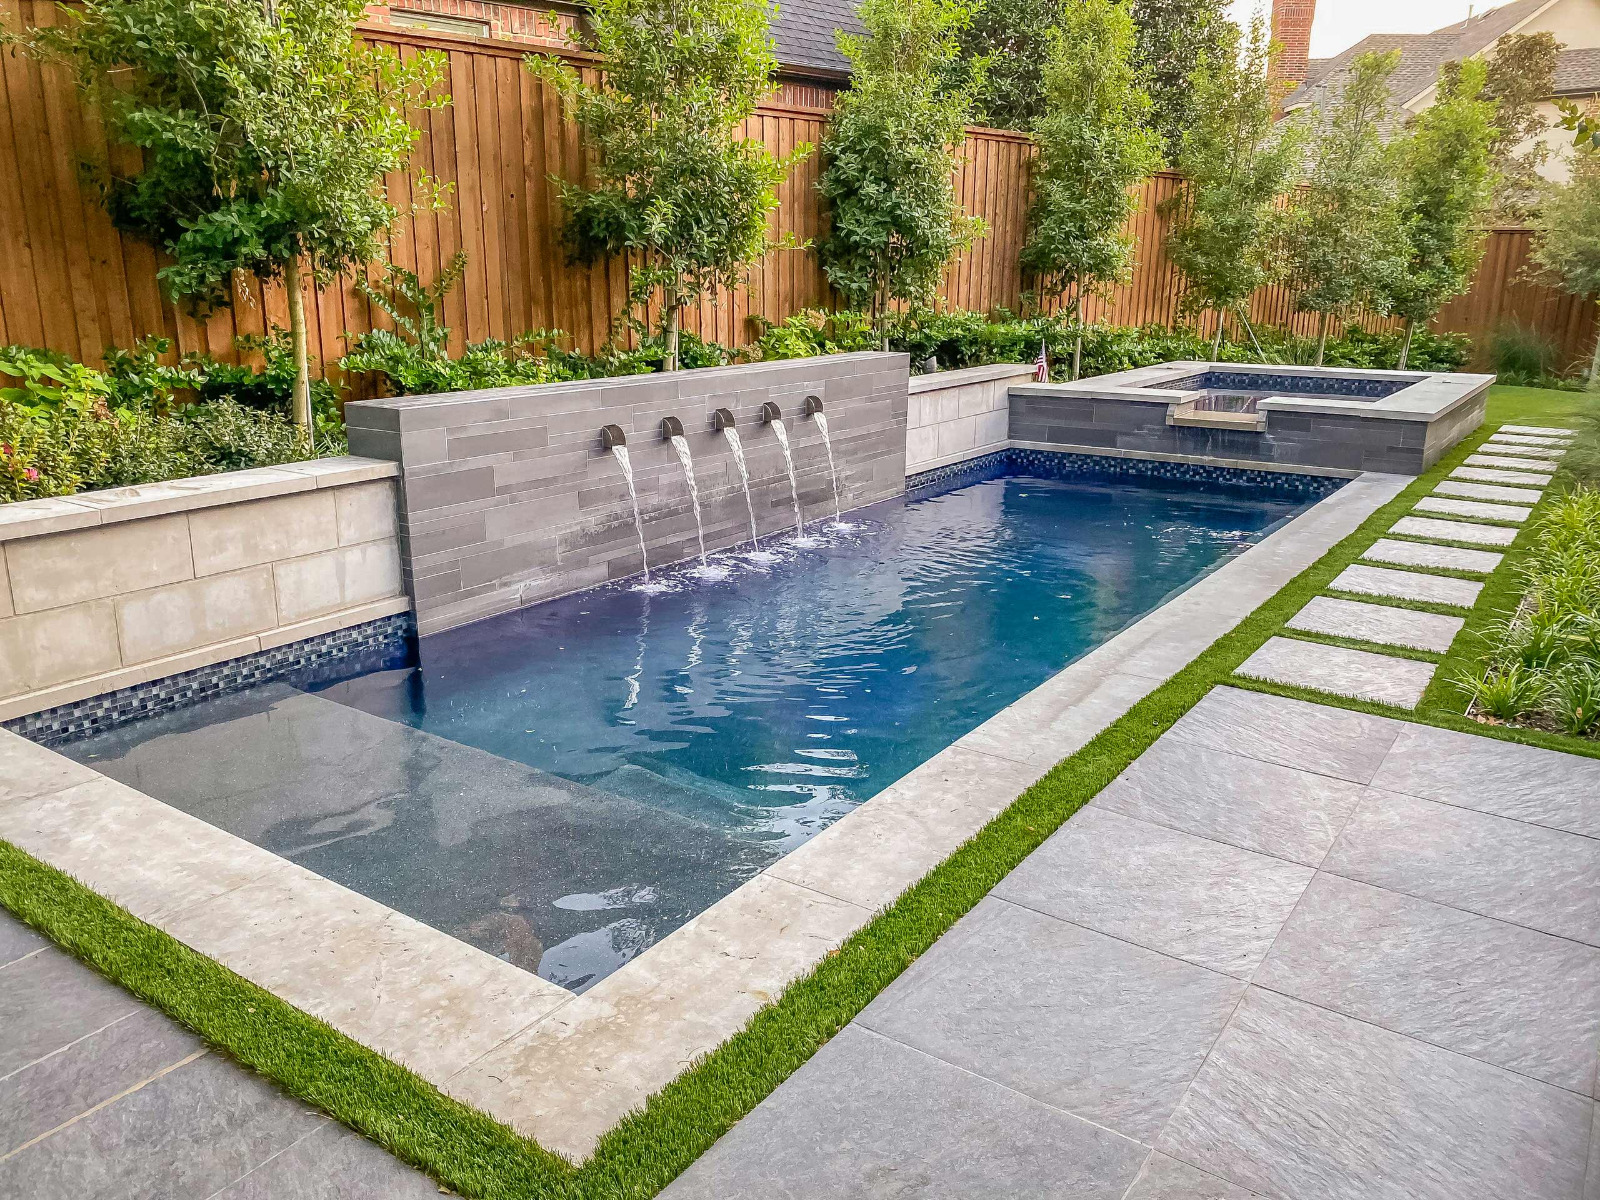 The top 5 most popular swimming pool designs for your backyard